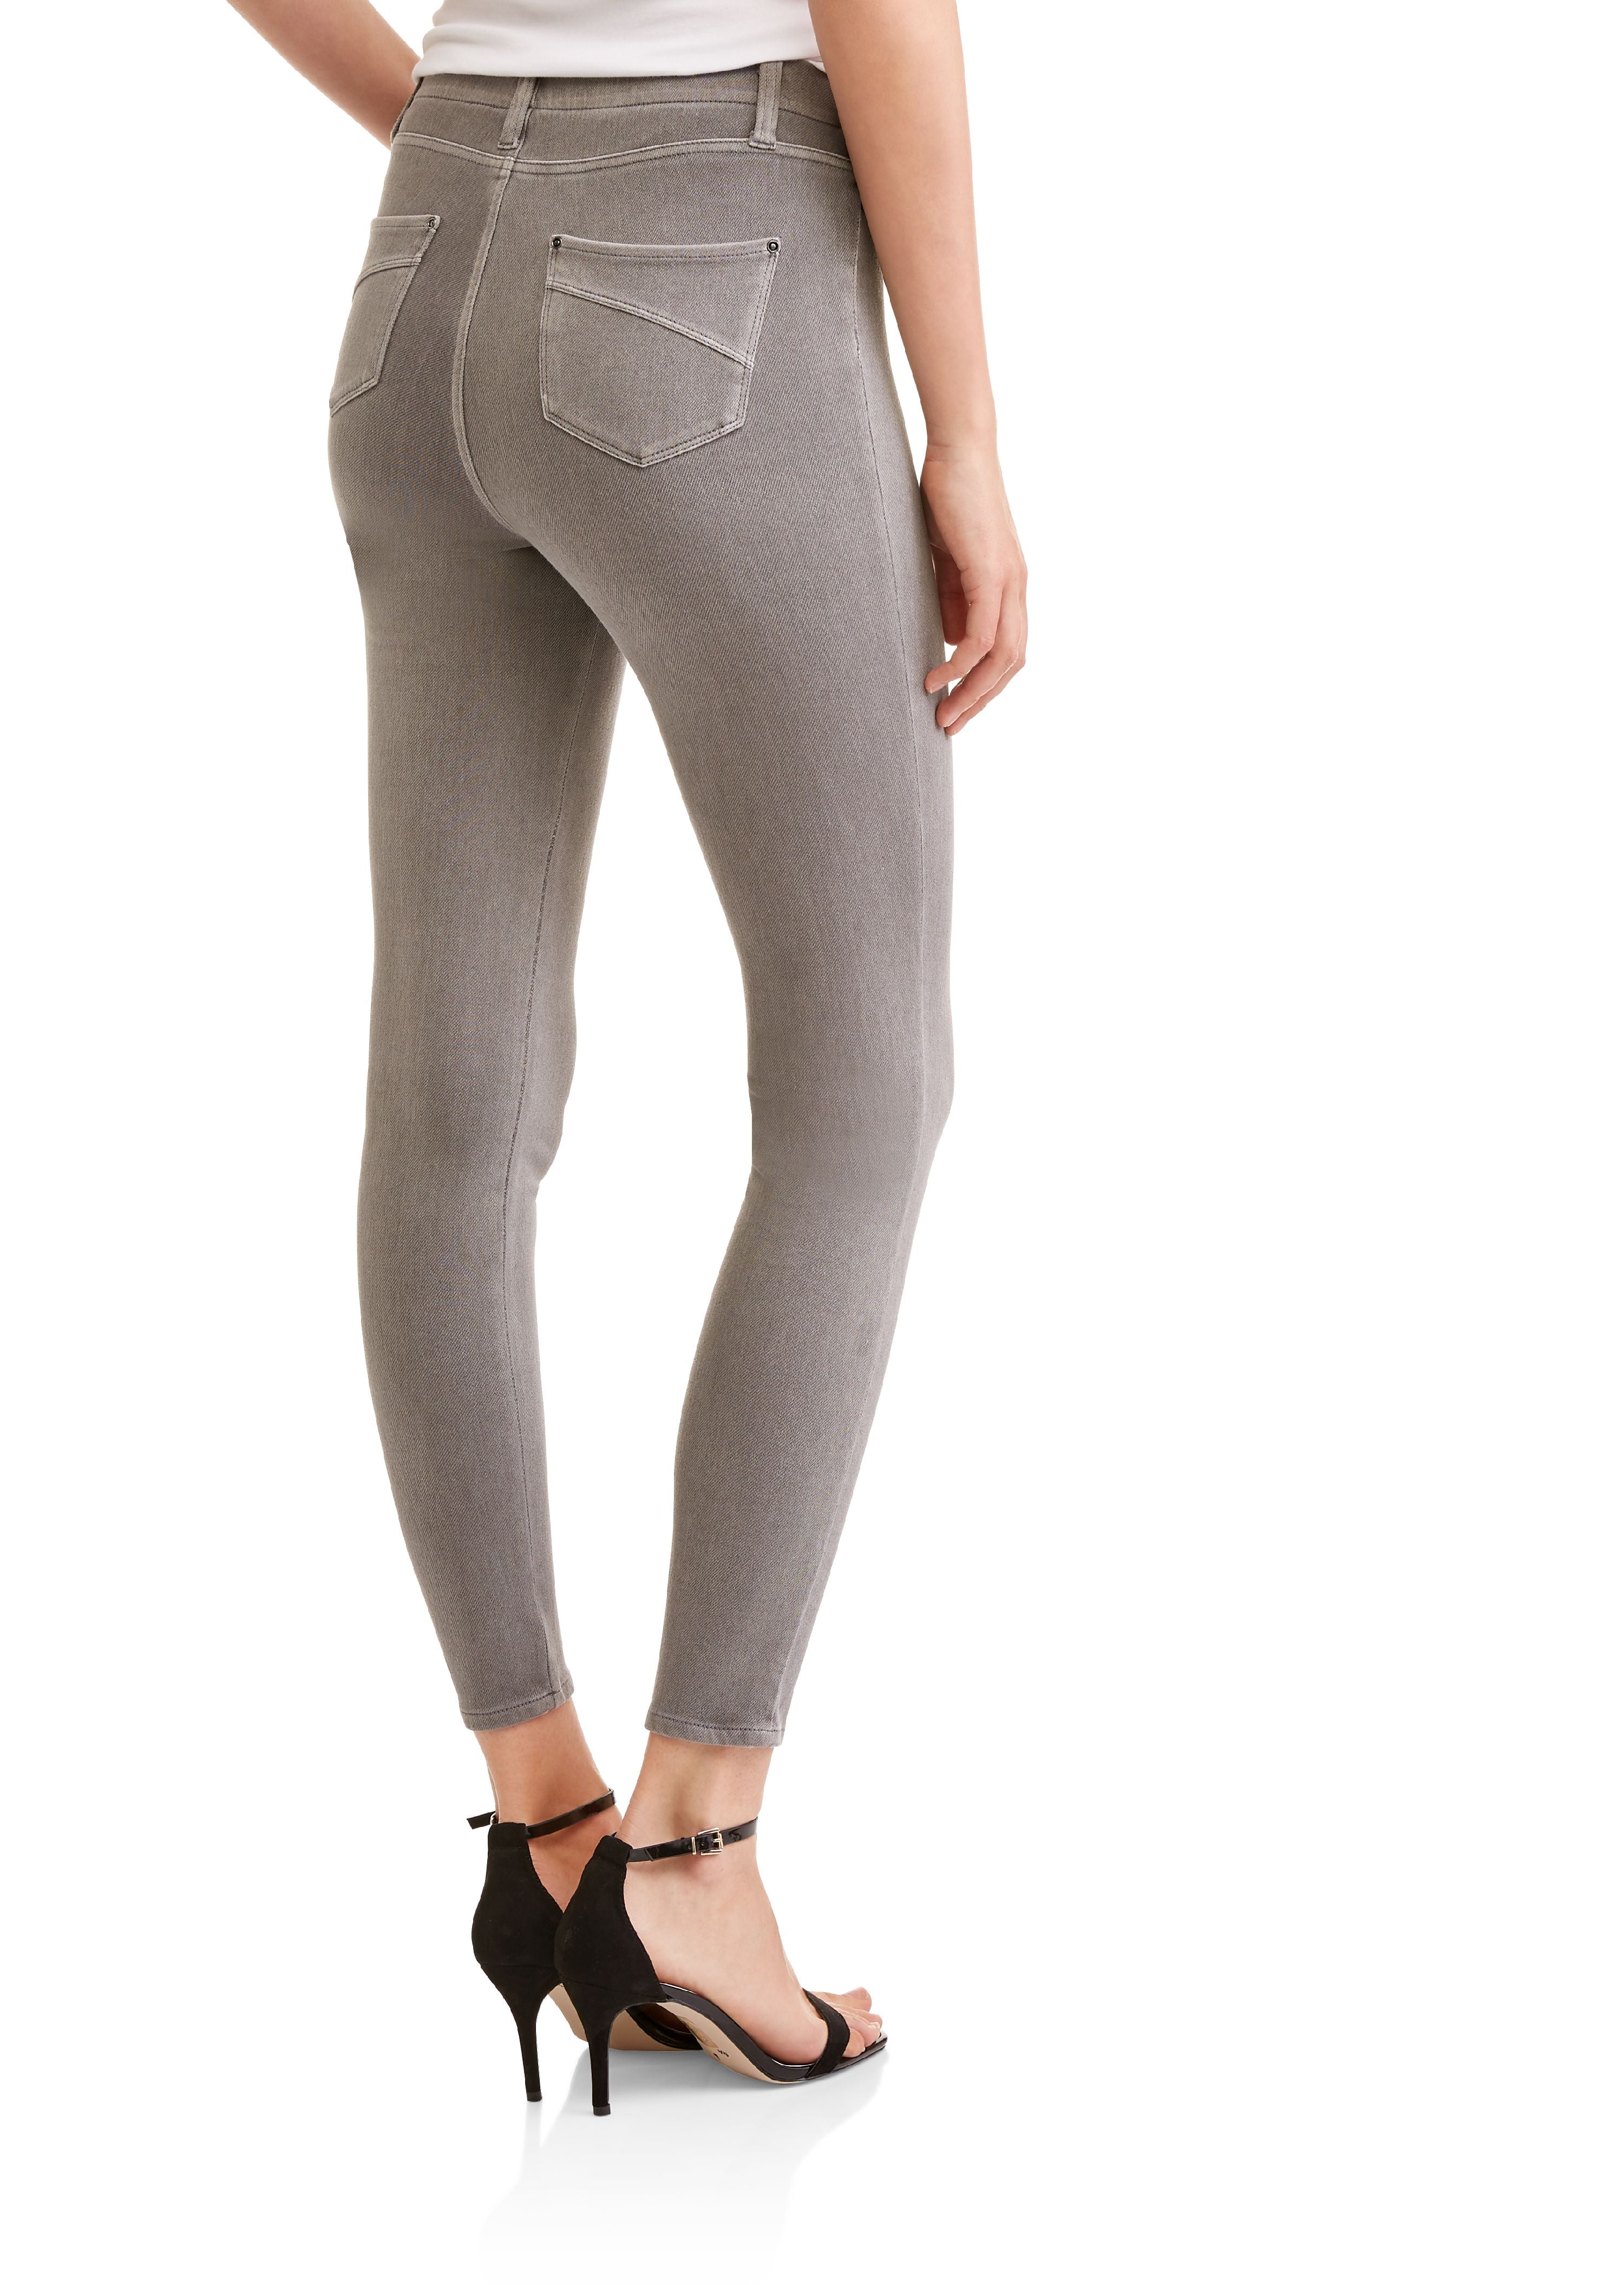 Faded Glory small grey jeggings with beltloops - $5 - From Ashley